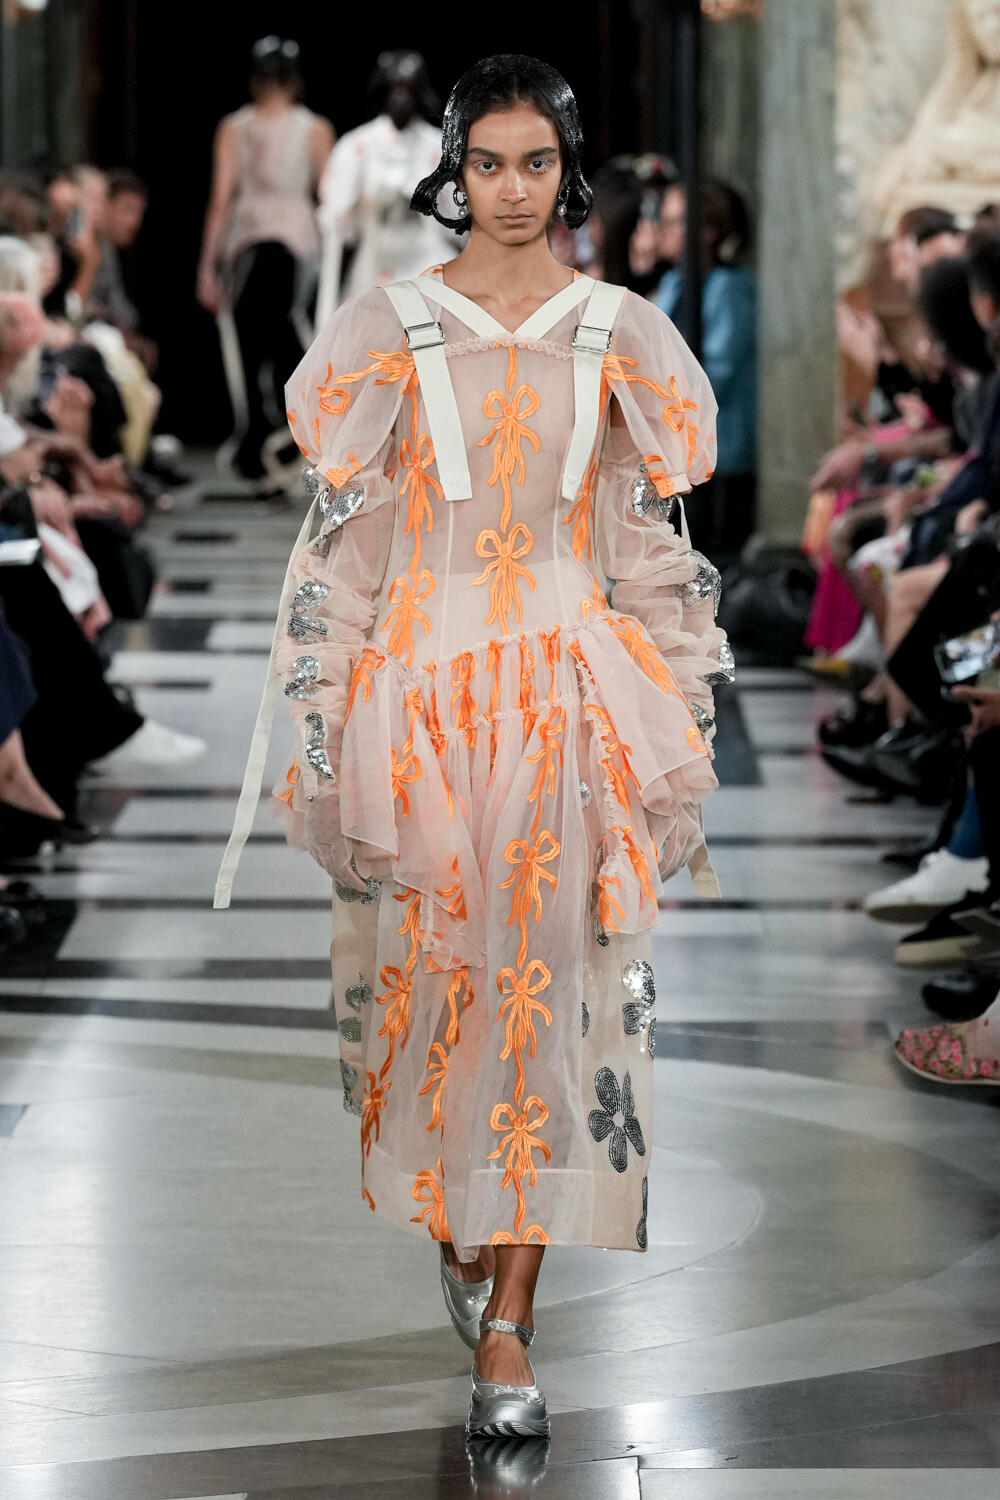 Top 20 Breakout Runway Models of Spring 2023 | The Impression